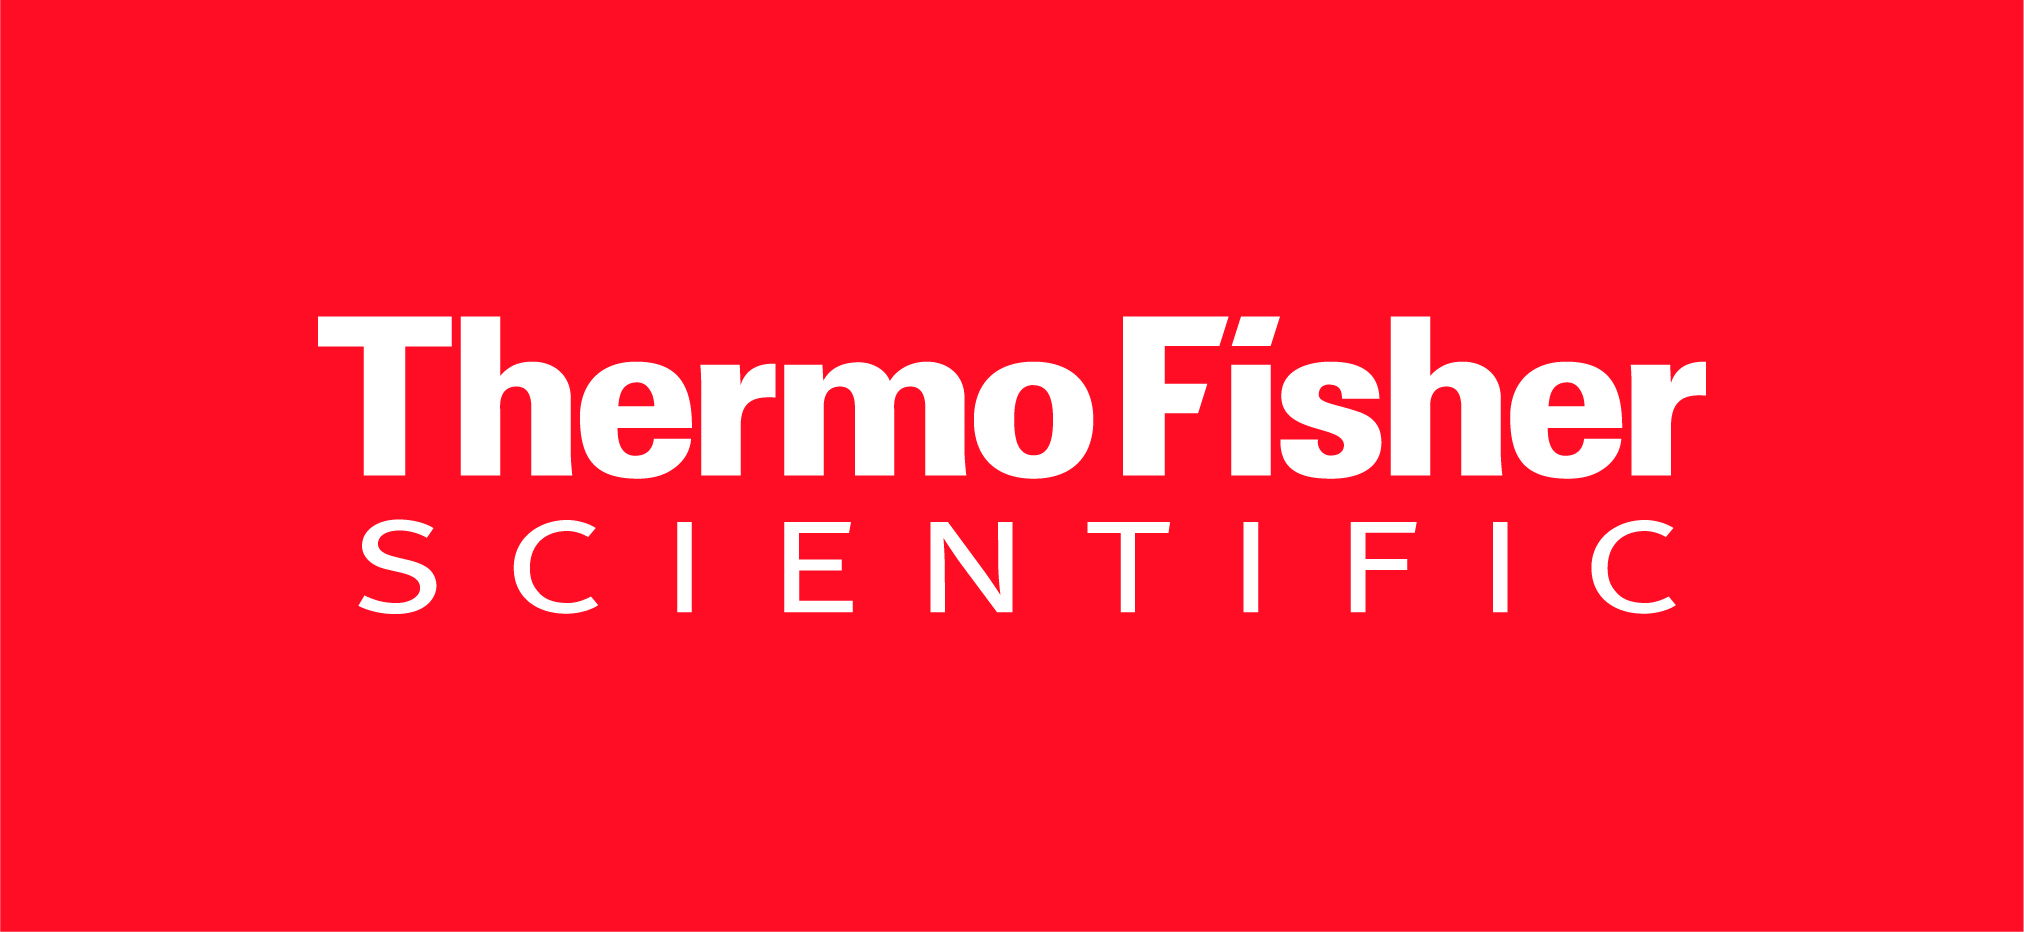 The Dark Intelligence Group Client/Sponsor - ThermoFisher